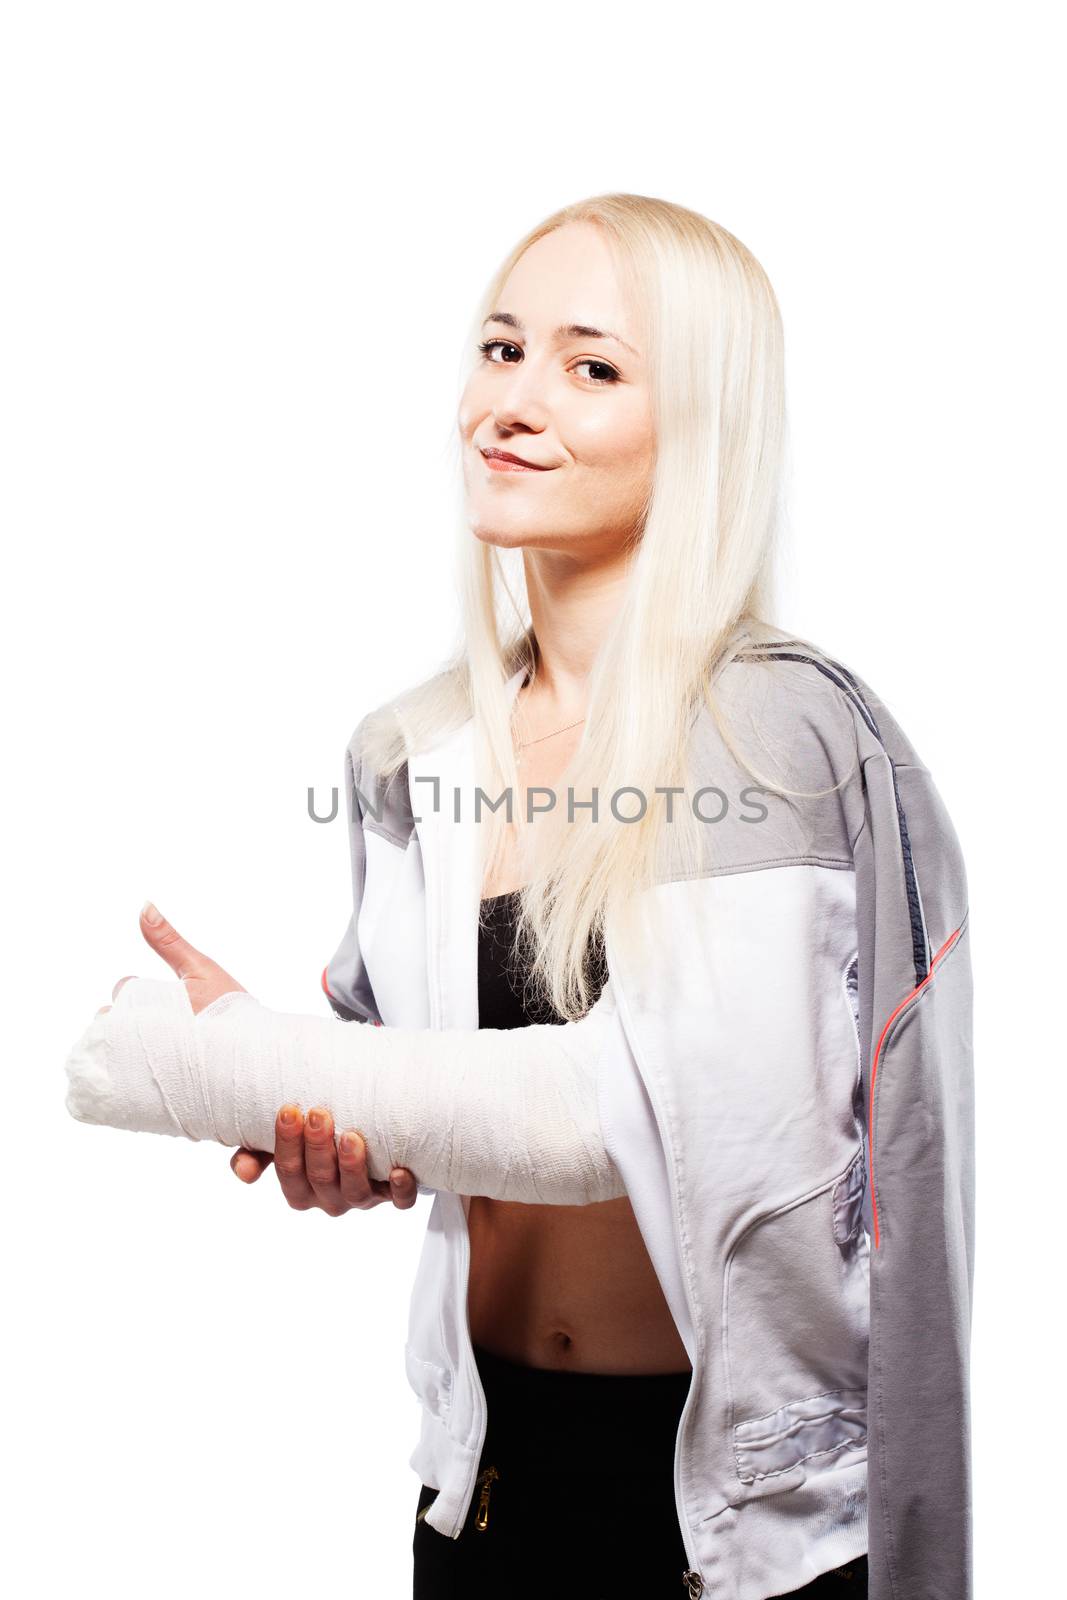 Fitness blond girl with a broken arm in plaster, sports outfit, making thumbs up gesture